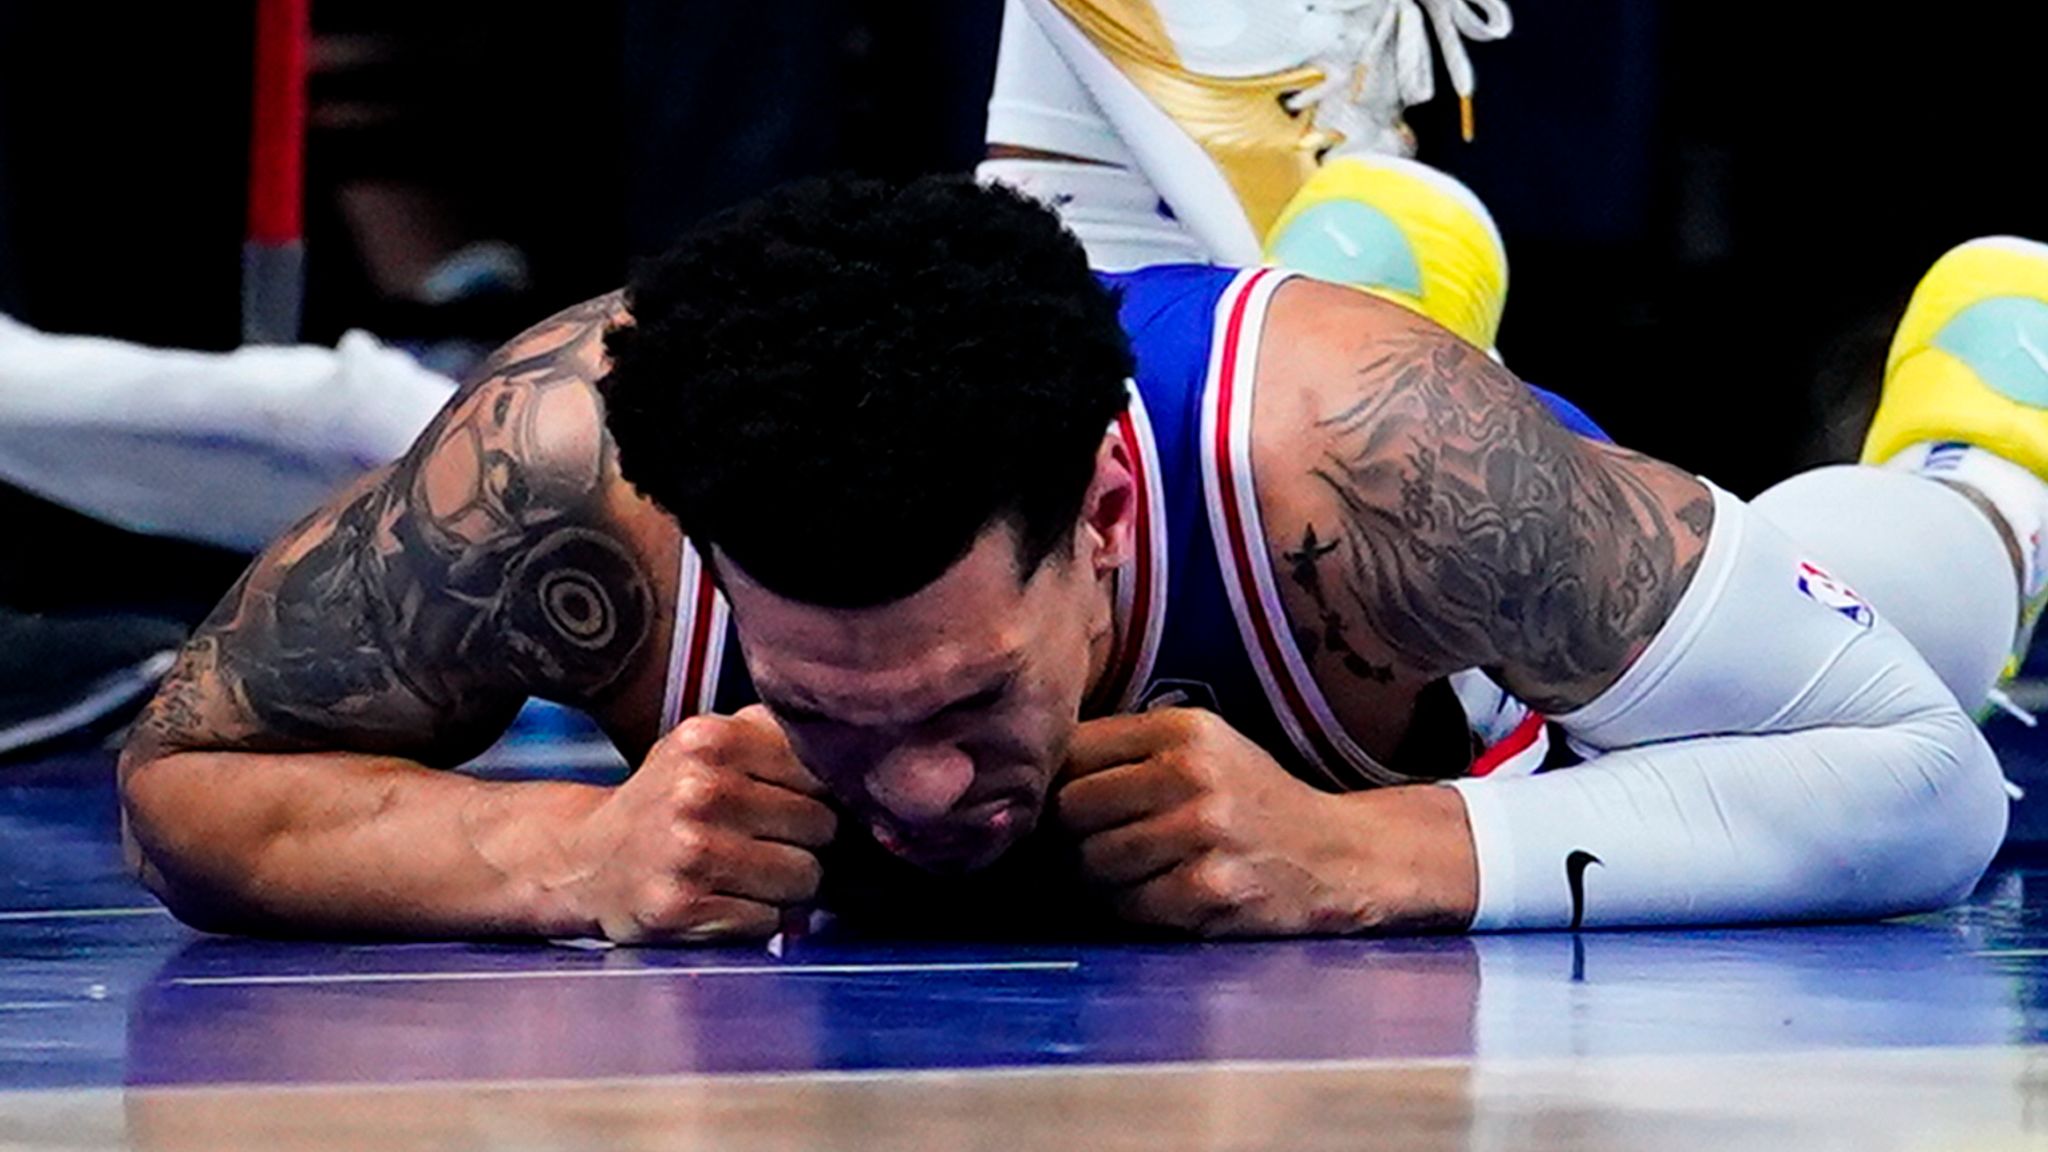 Lakers Outsiders on Twitter Looks like Danny Green got the wildest of  tattoos during the break httpstcoCpF3IHCRux  X